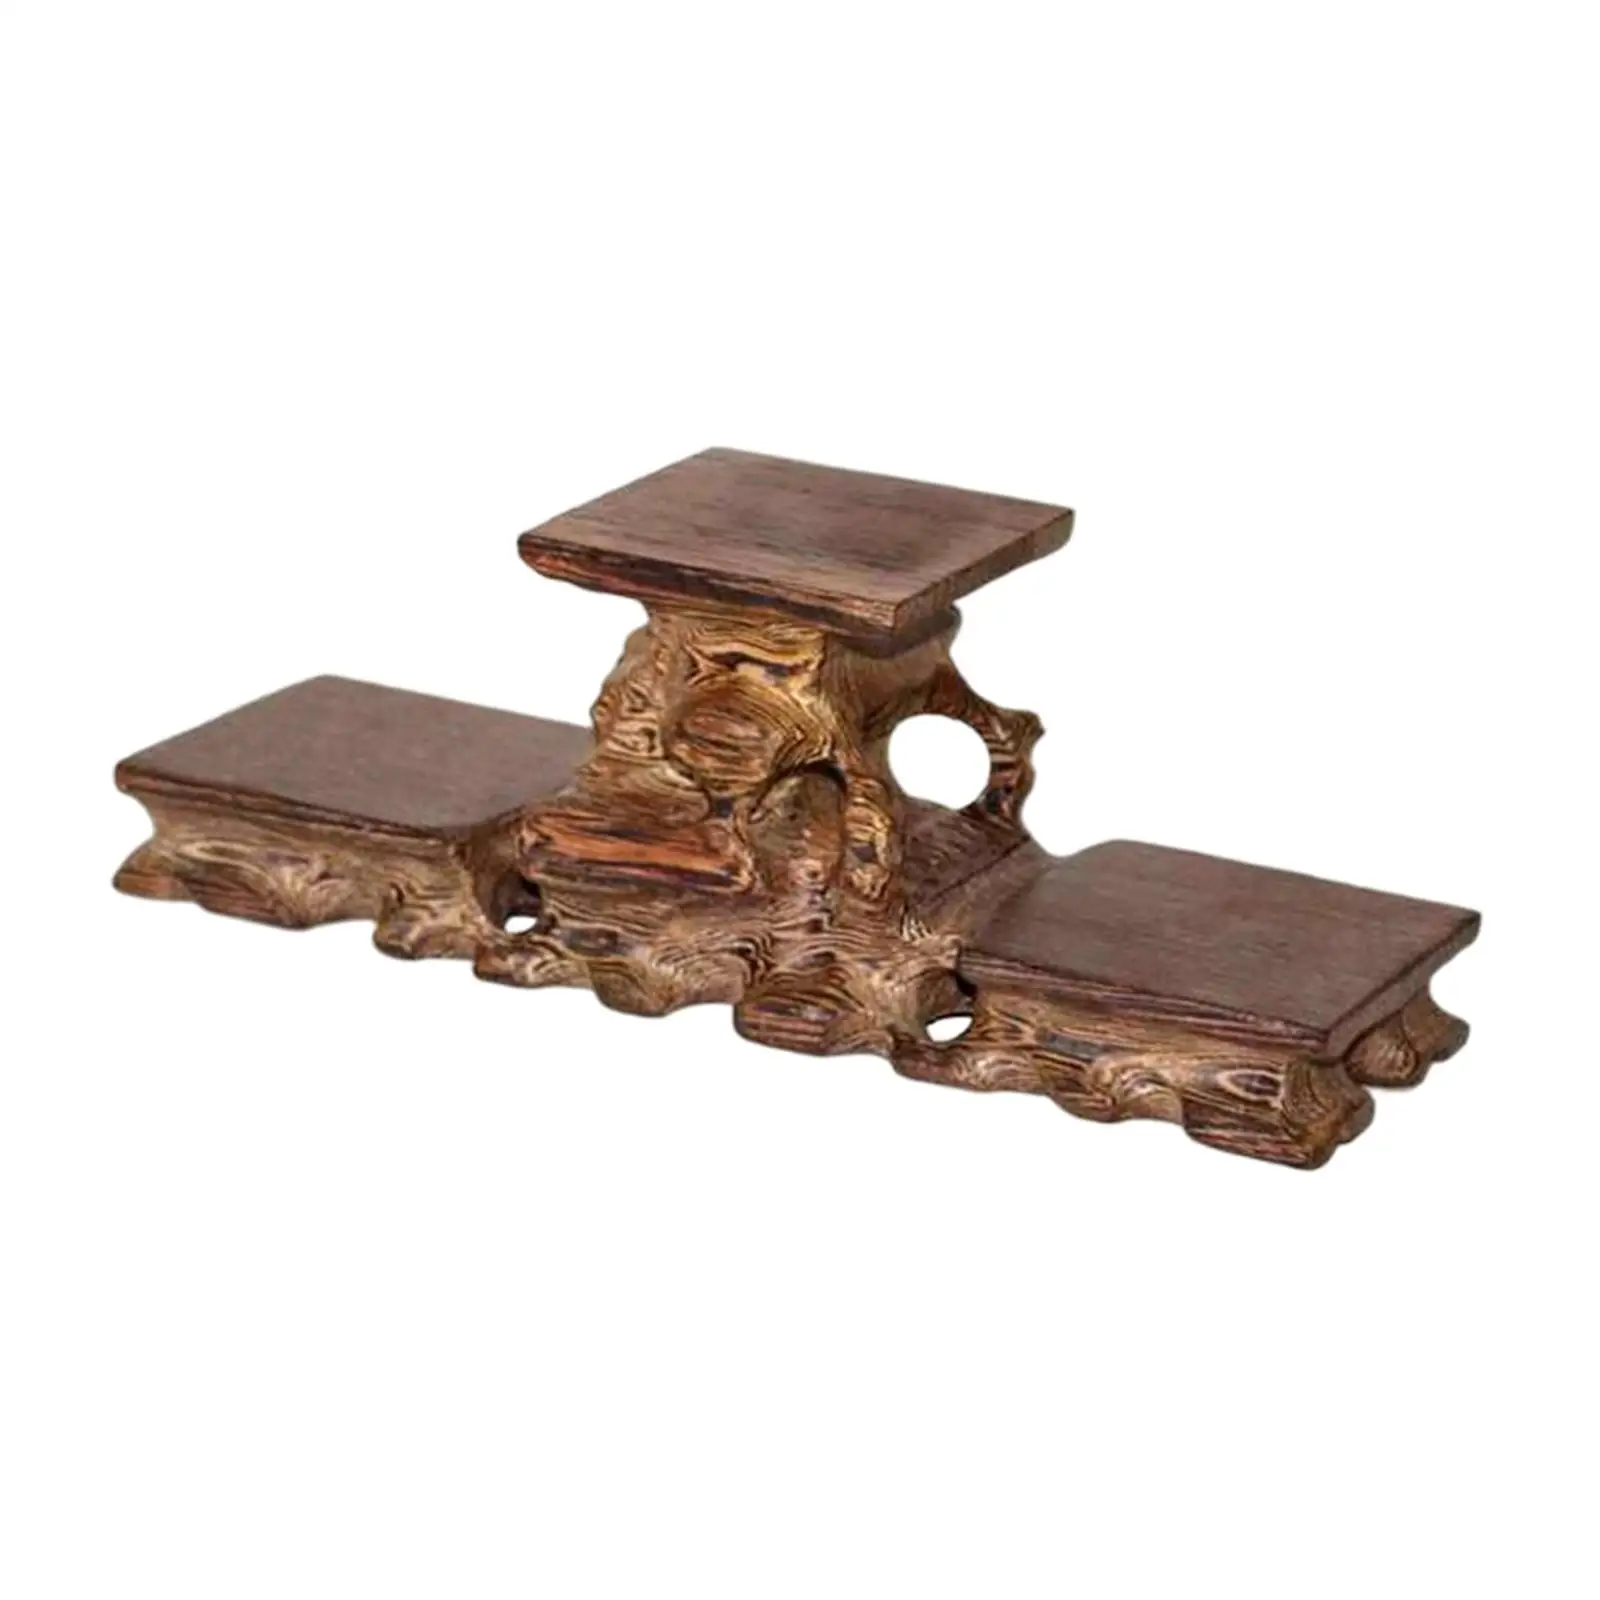 Wooden Stone Display Stand Teapot Base Collectibles Circular Wooden Base for Photography Props Desktop Living Room Decoration